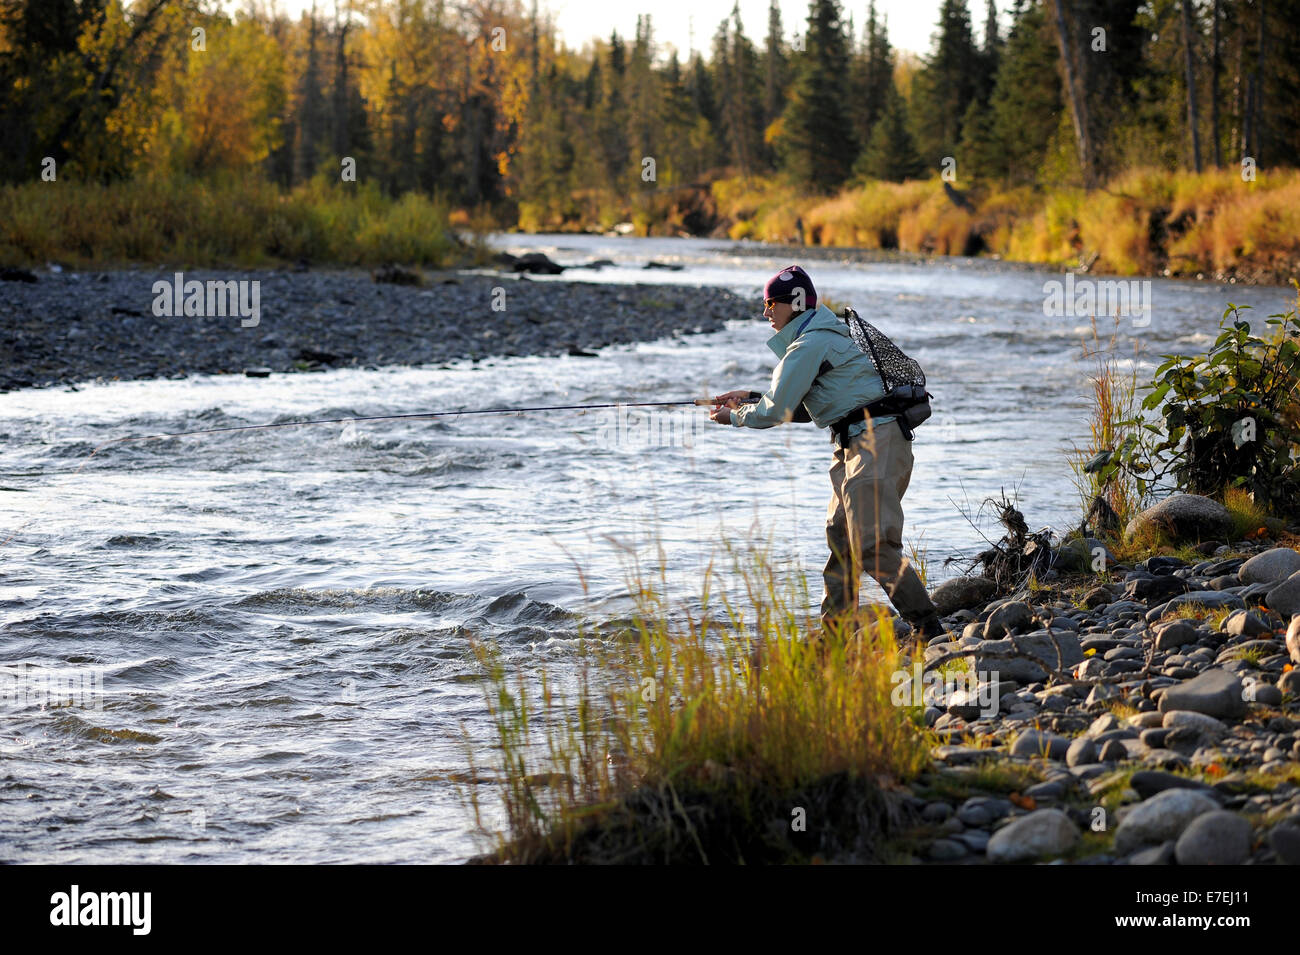 Woman casts for wild steelhead on Deep Creek on the Western Kenai Peninsula, Alaska September 2009.  Flowing into Cook Inlet north of Homer, the waters of Deep Creek and the Anchor River host late fall runs of wild steelhead. Stock Photo